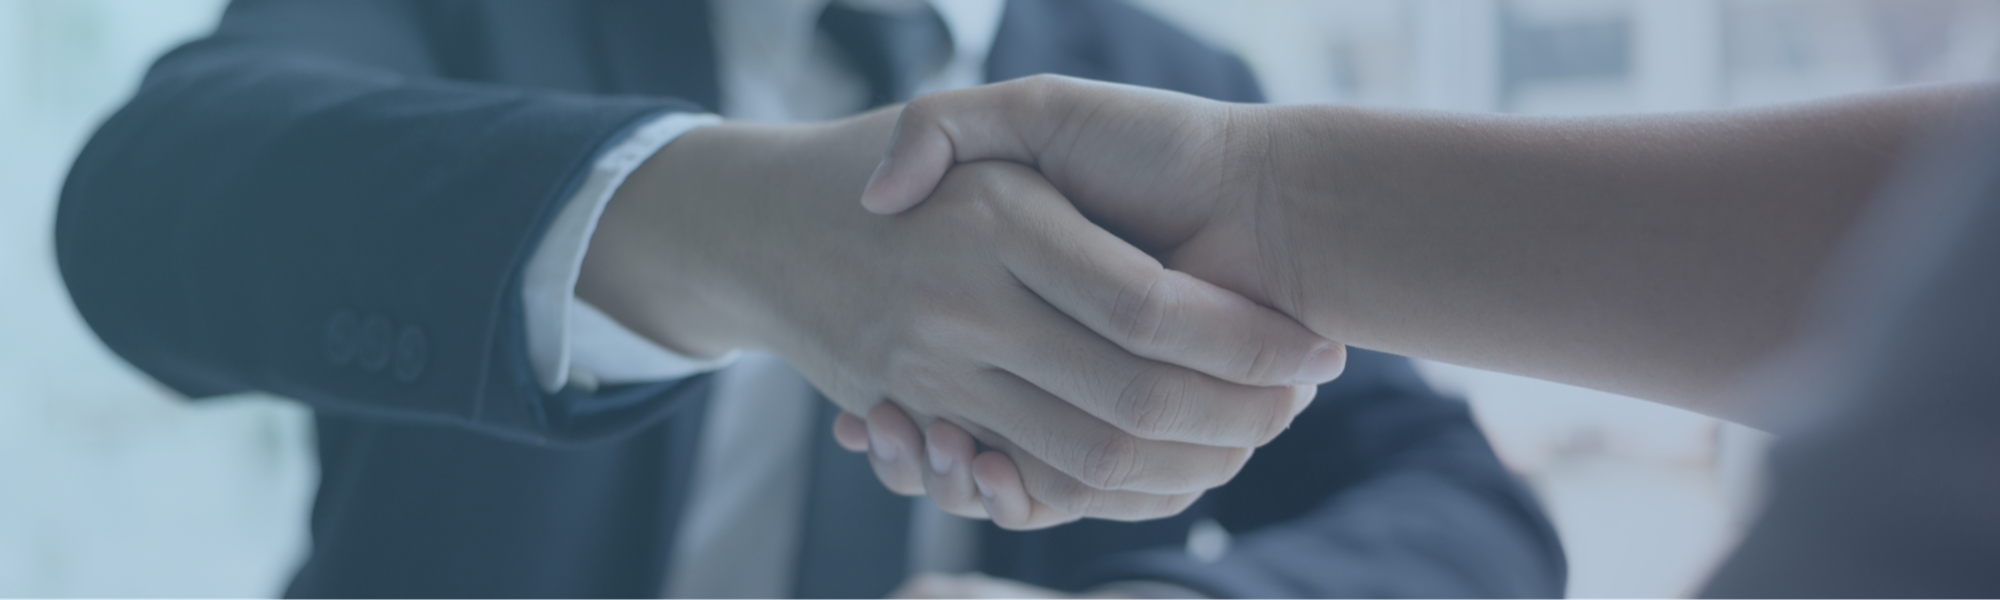 Candour Talent Recruitment Agency - Partner with us Page. banner of a handshake in a professional working environment, symbolizing our commitment to forging strong partnerships and collaborations.